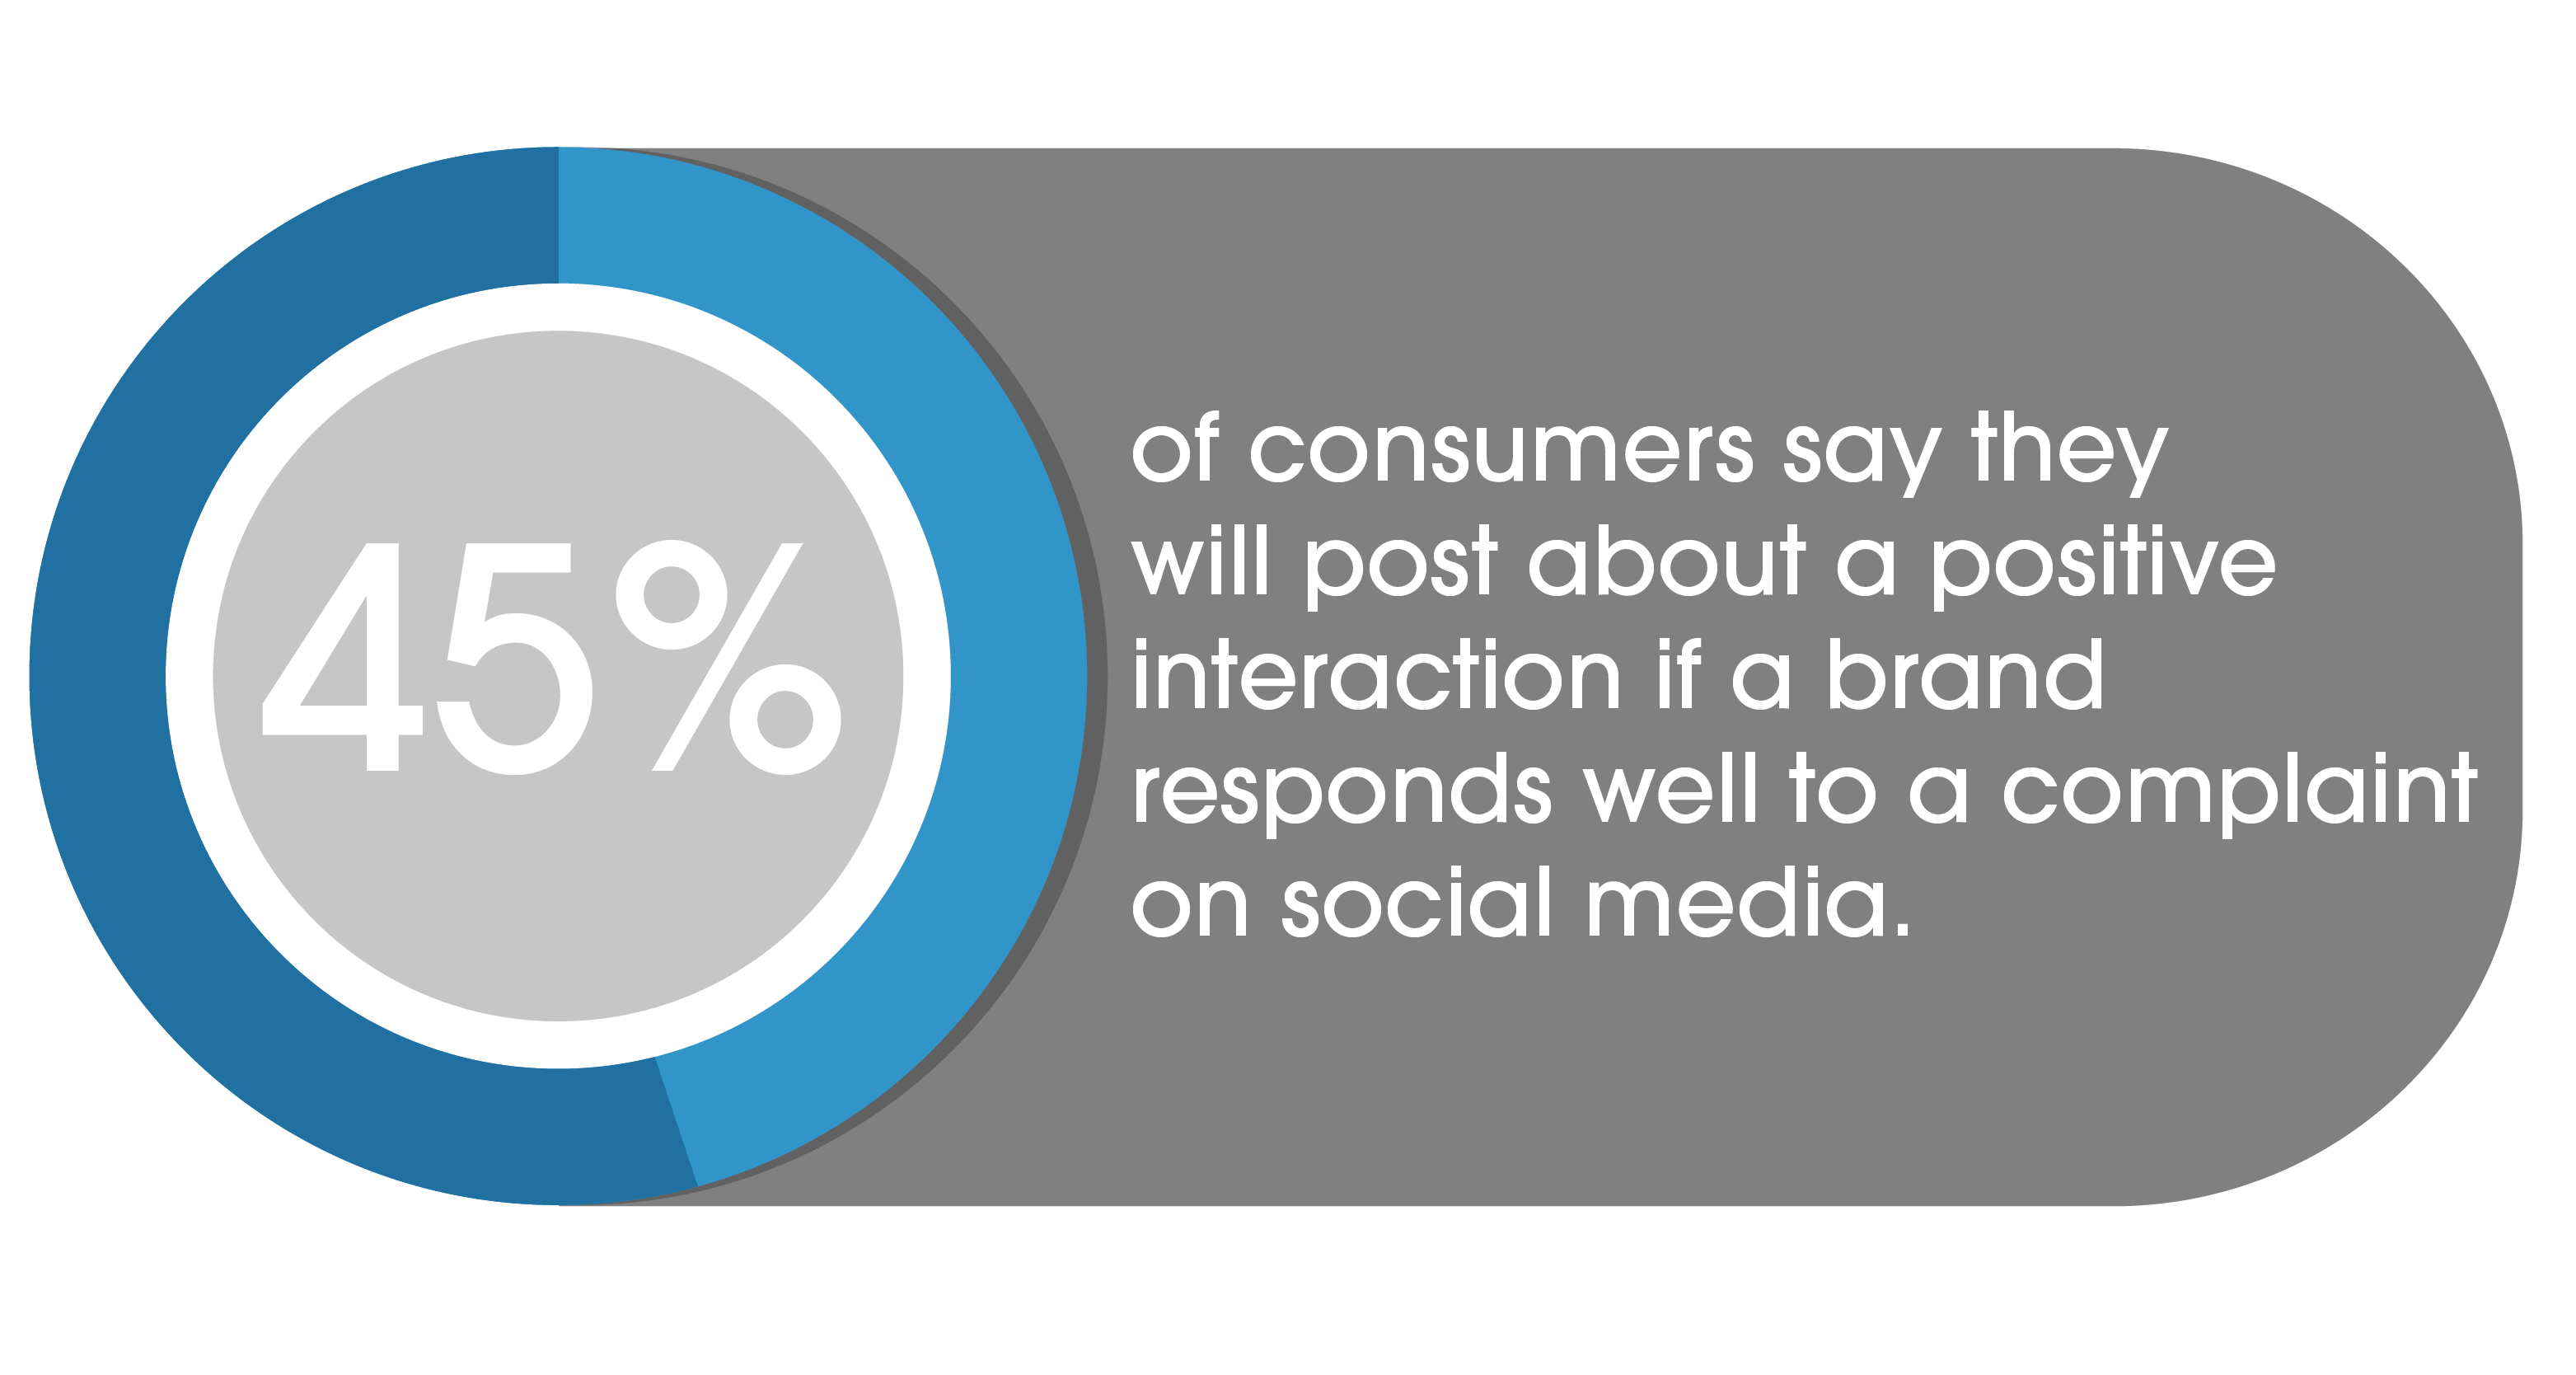 45% of consumers post about positive interaction if brand responds to complaint on social media